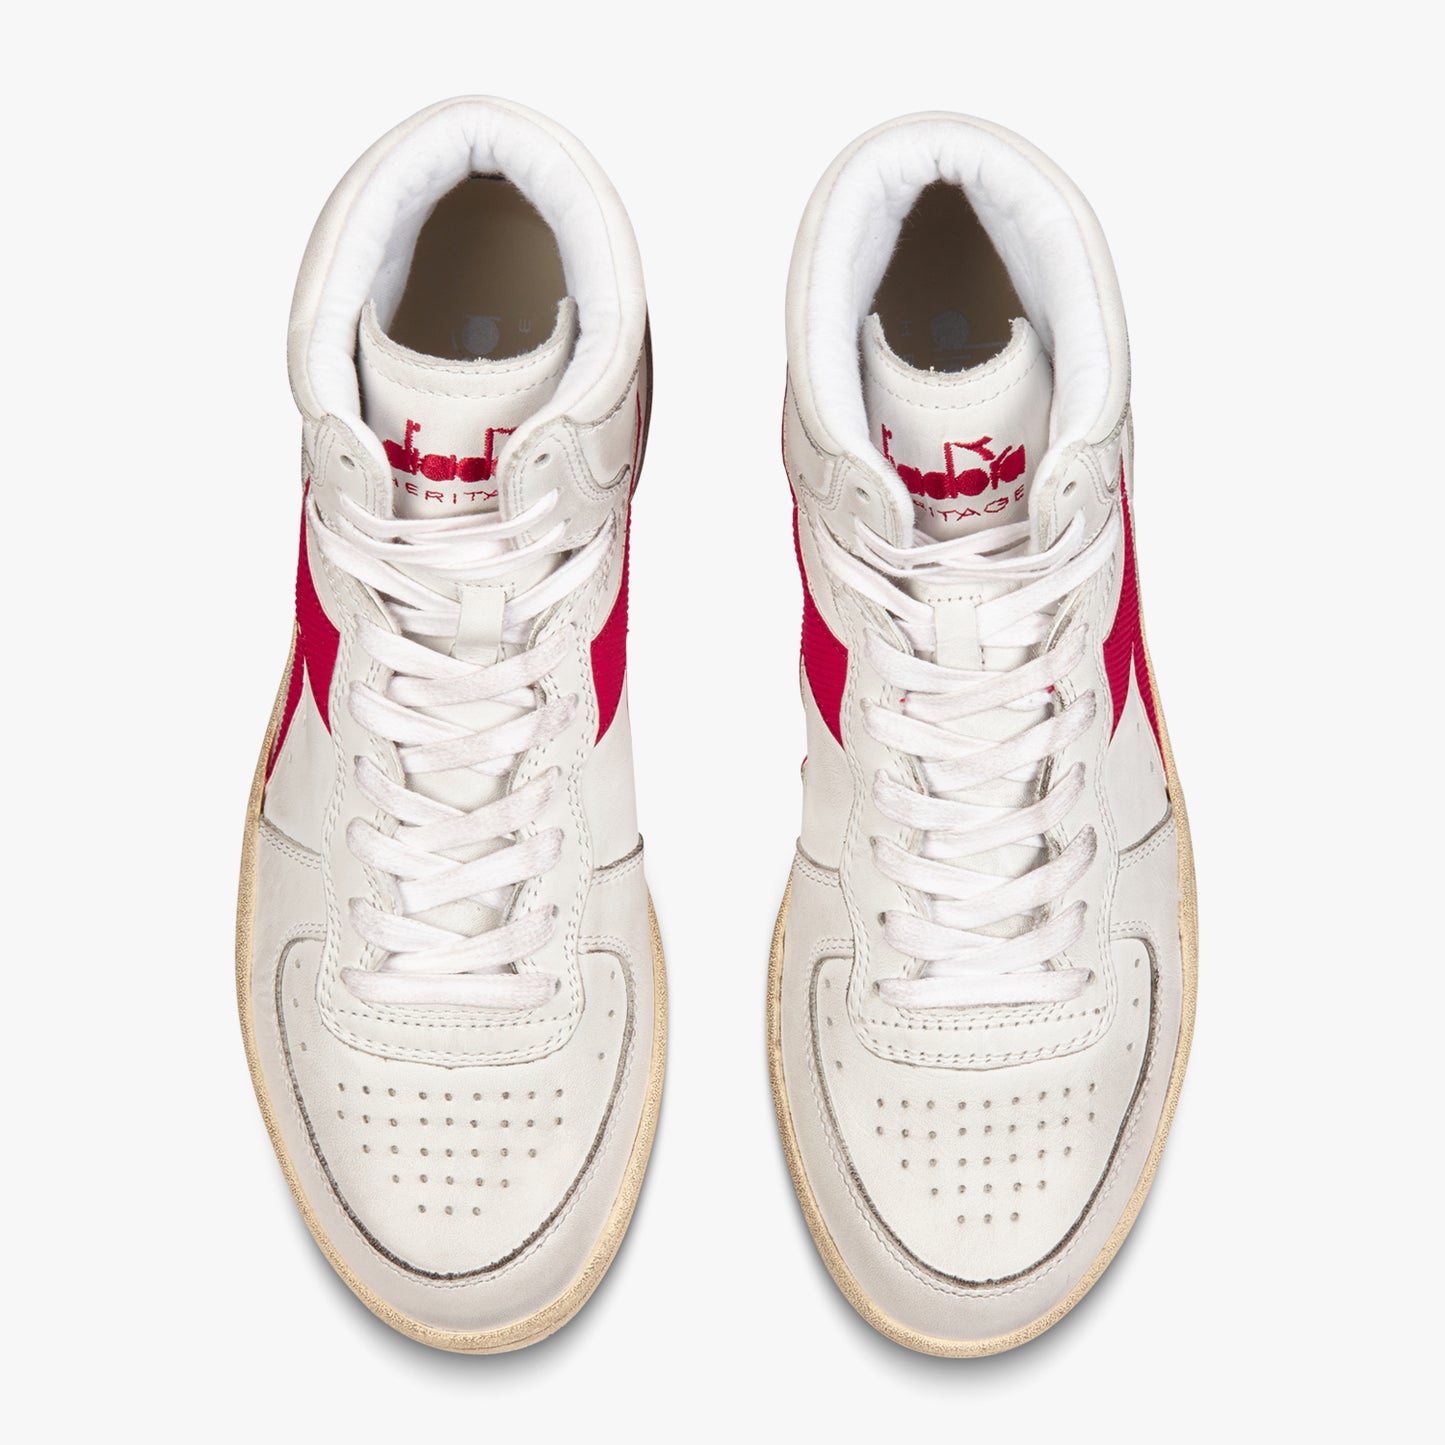 side by side aerial view from above of diadora white mi basket used shoes with red stripe